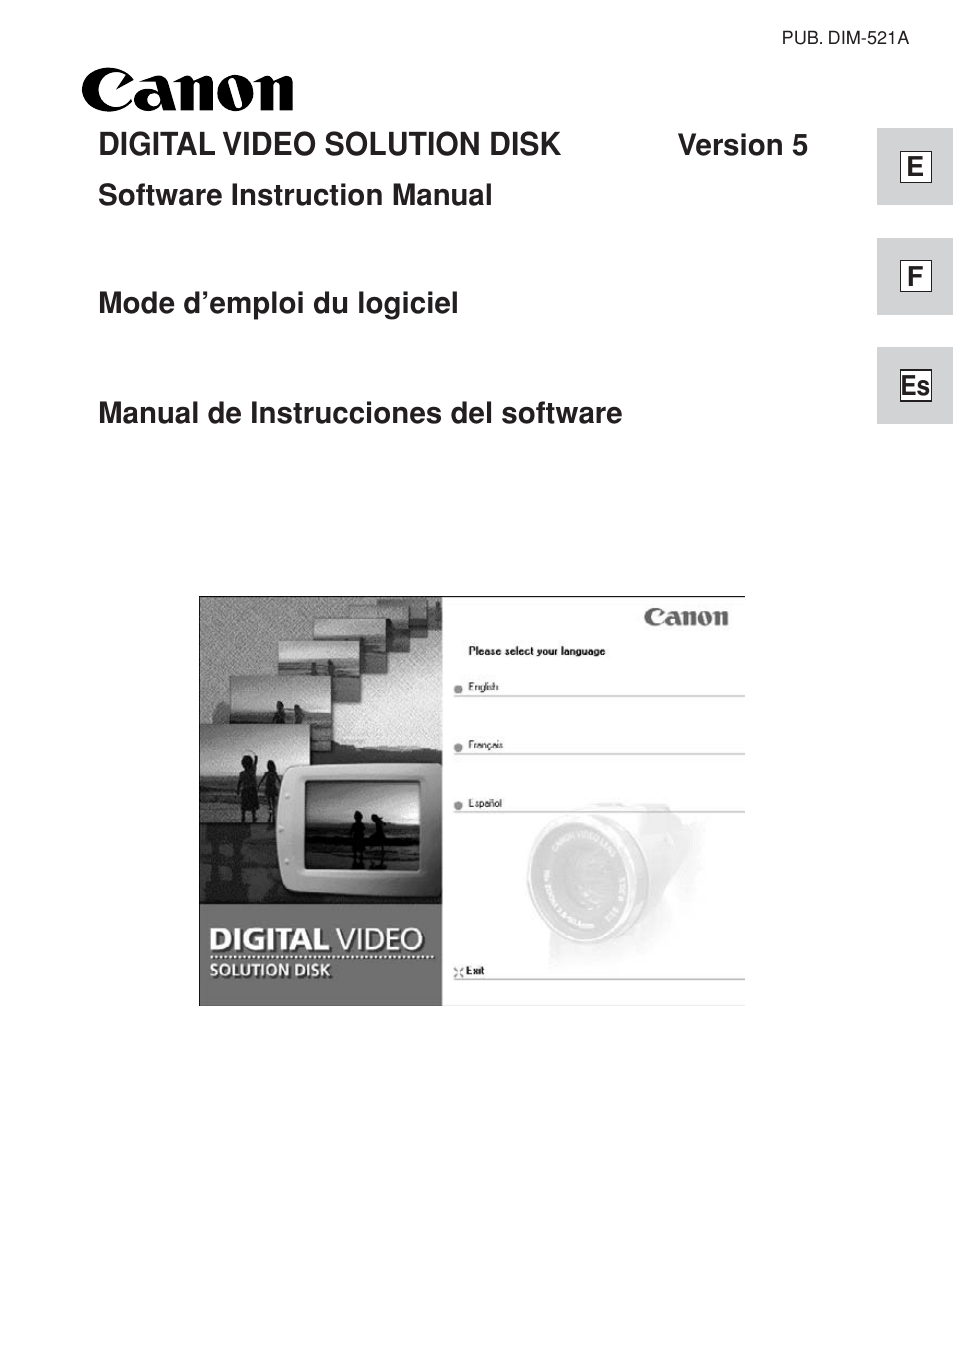 Canon DIM-521A User Manual | 100 pages